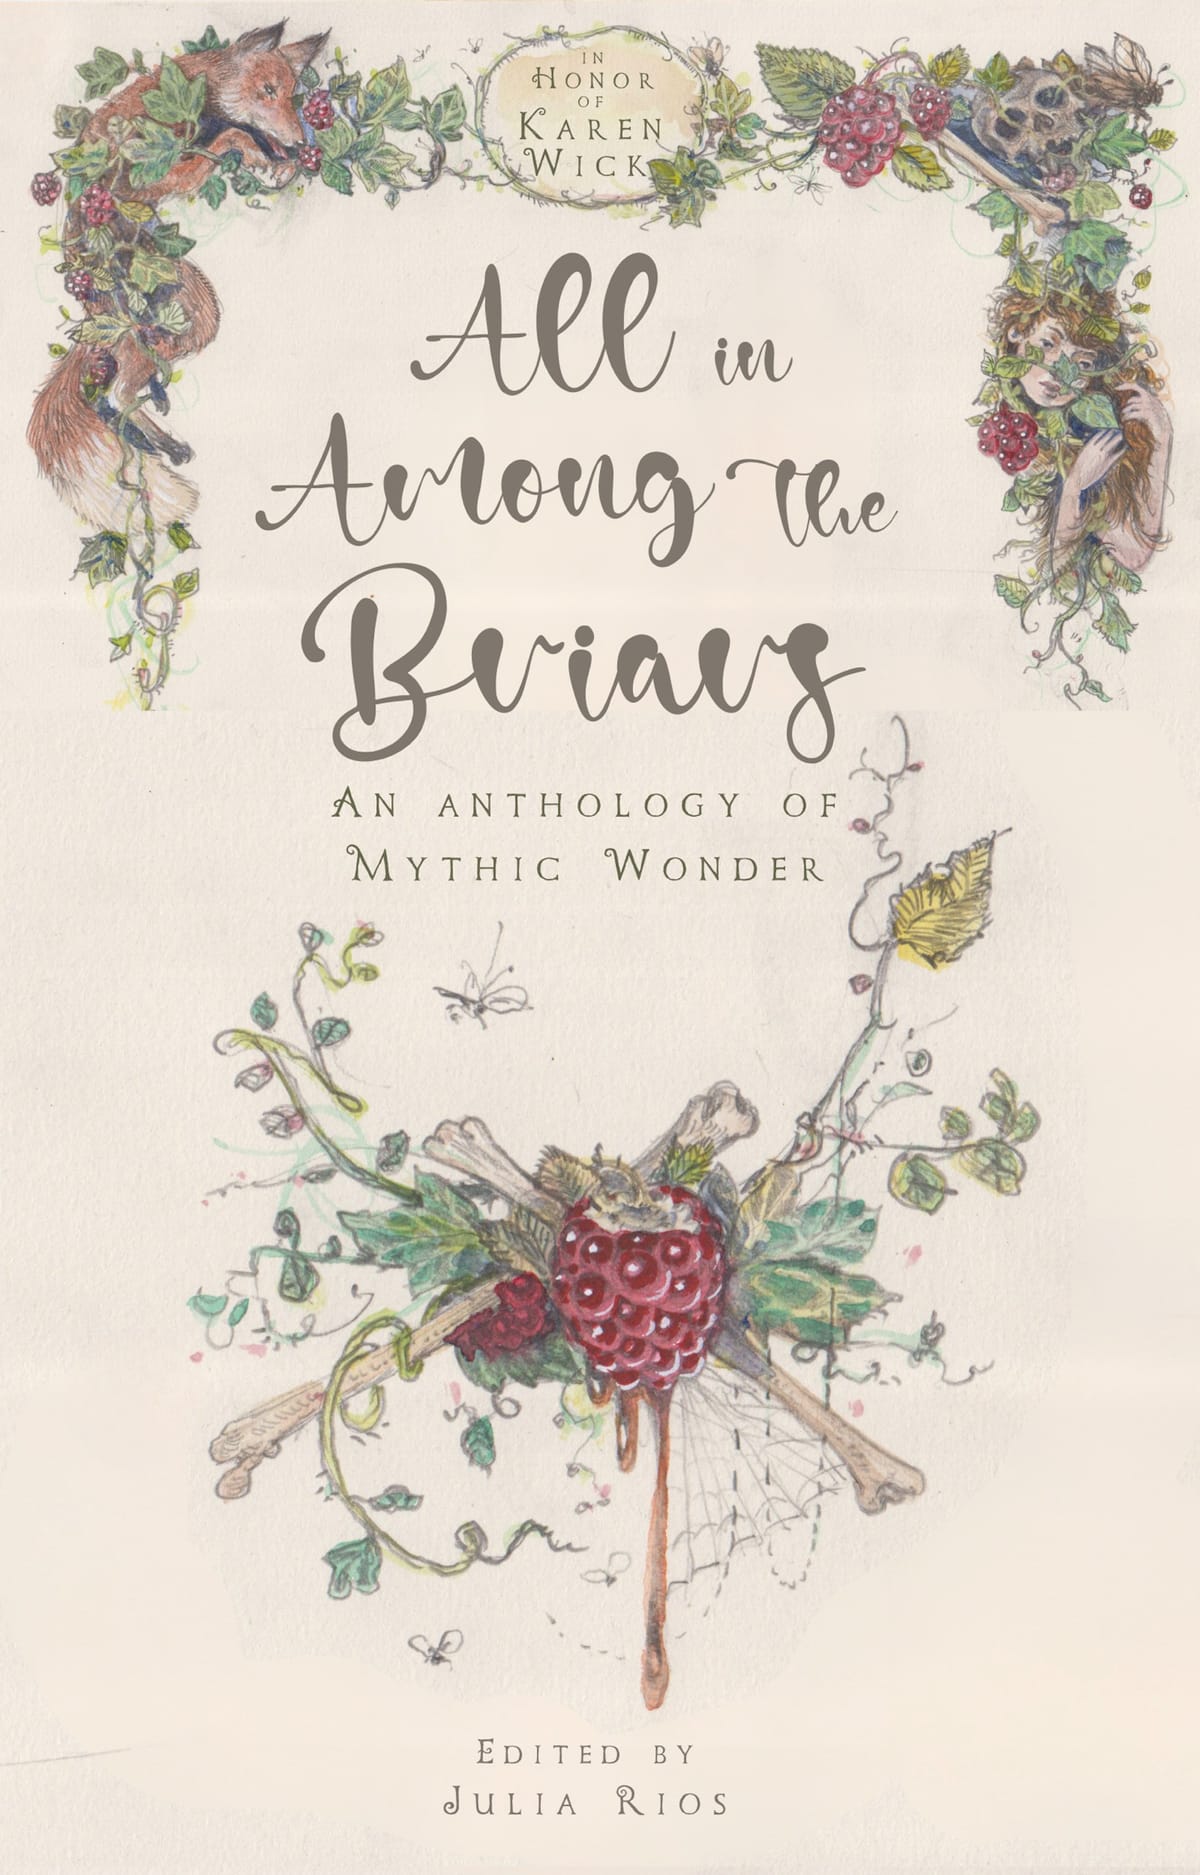 All in Among the Briars: an ebook anthology of the mythic and wondrous